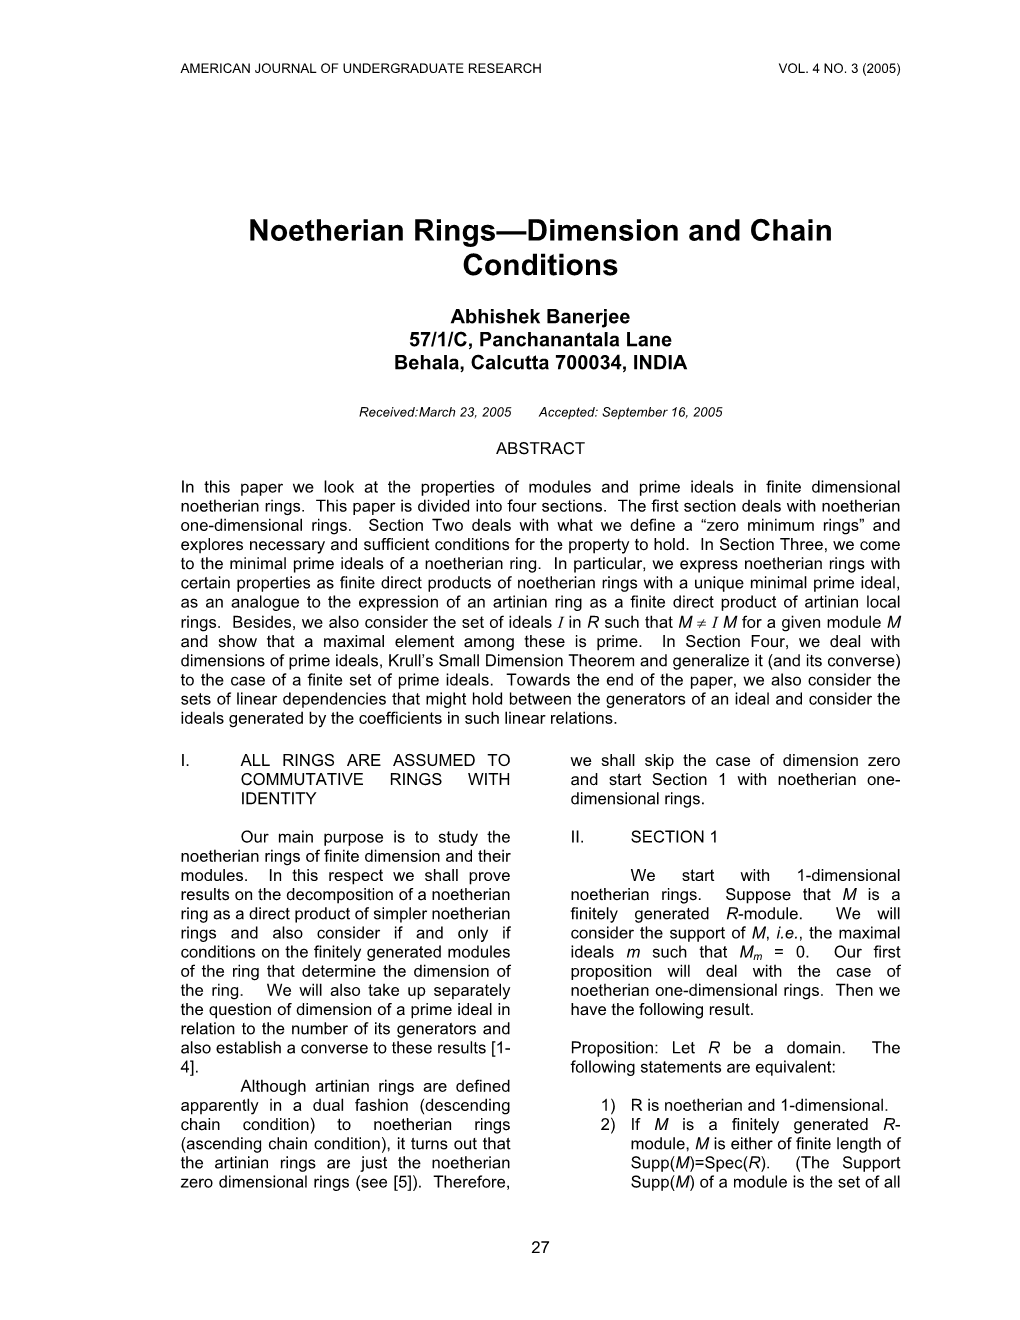 Noetherian Rings—Dimension and Chain Conditions